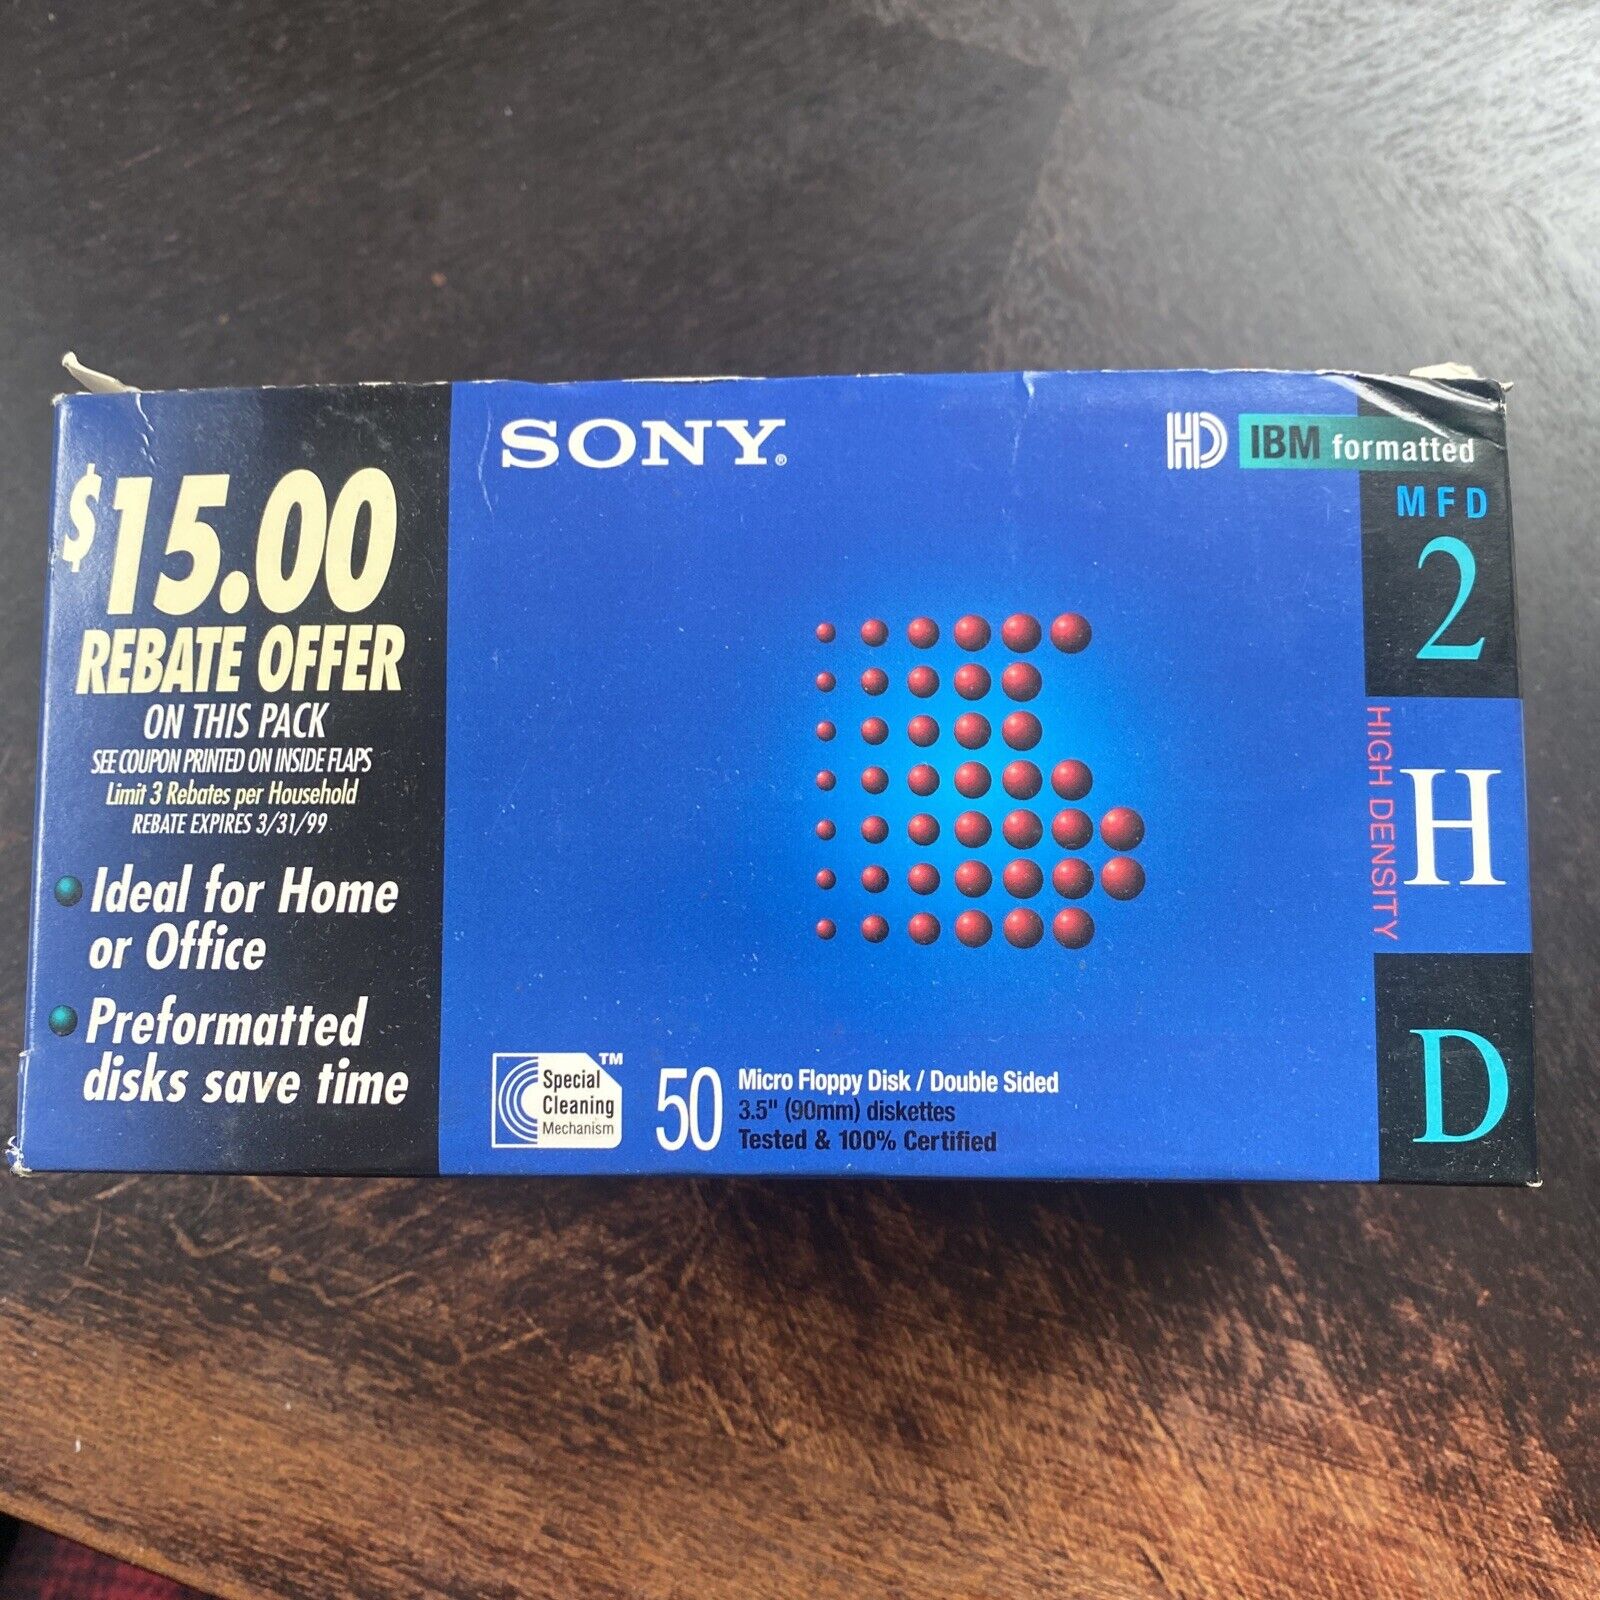 Sony IBM Formatted 2HD Micro Floppy Disk Double Sided 3.5 Diskettes (Box Of 30)